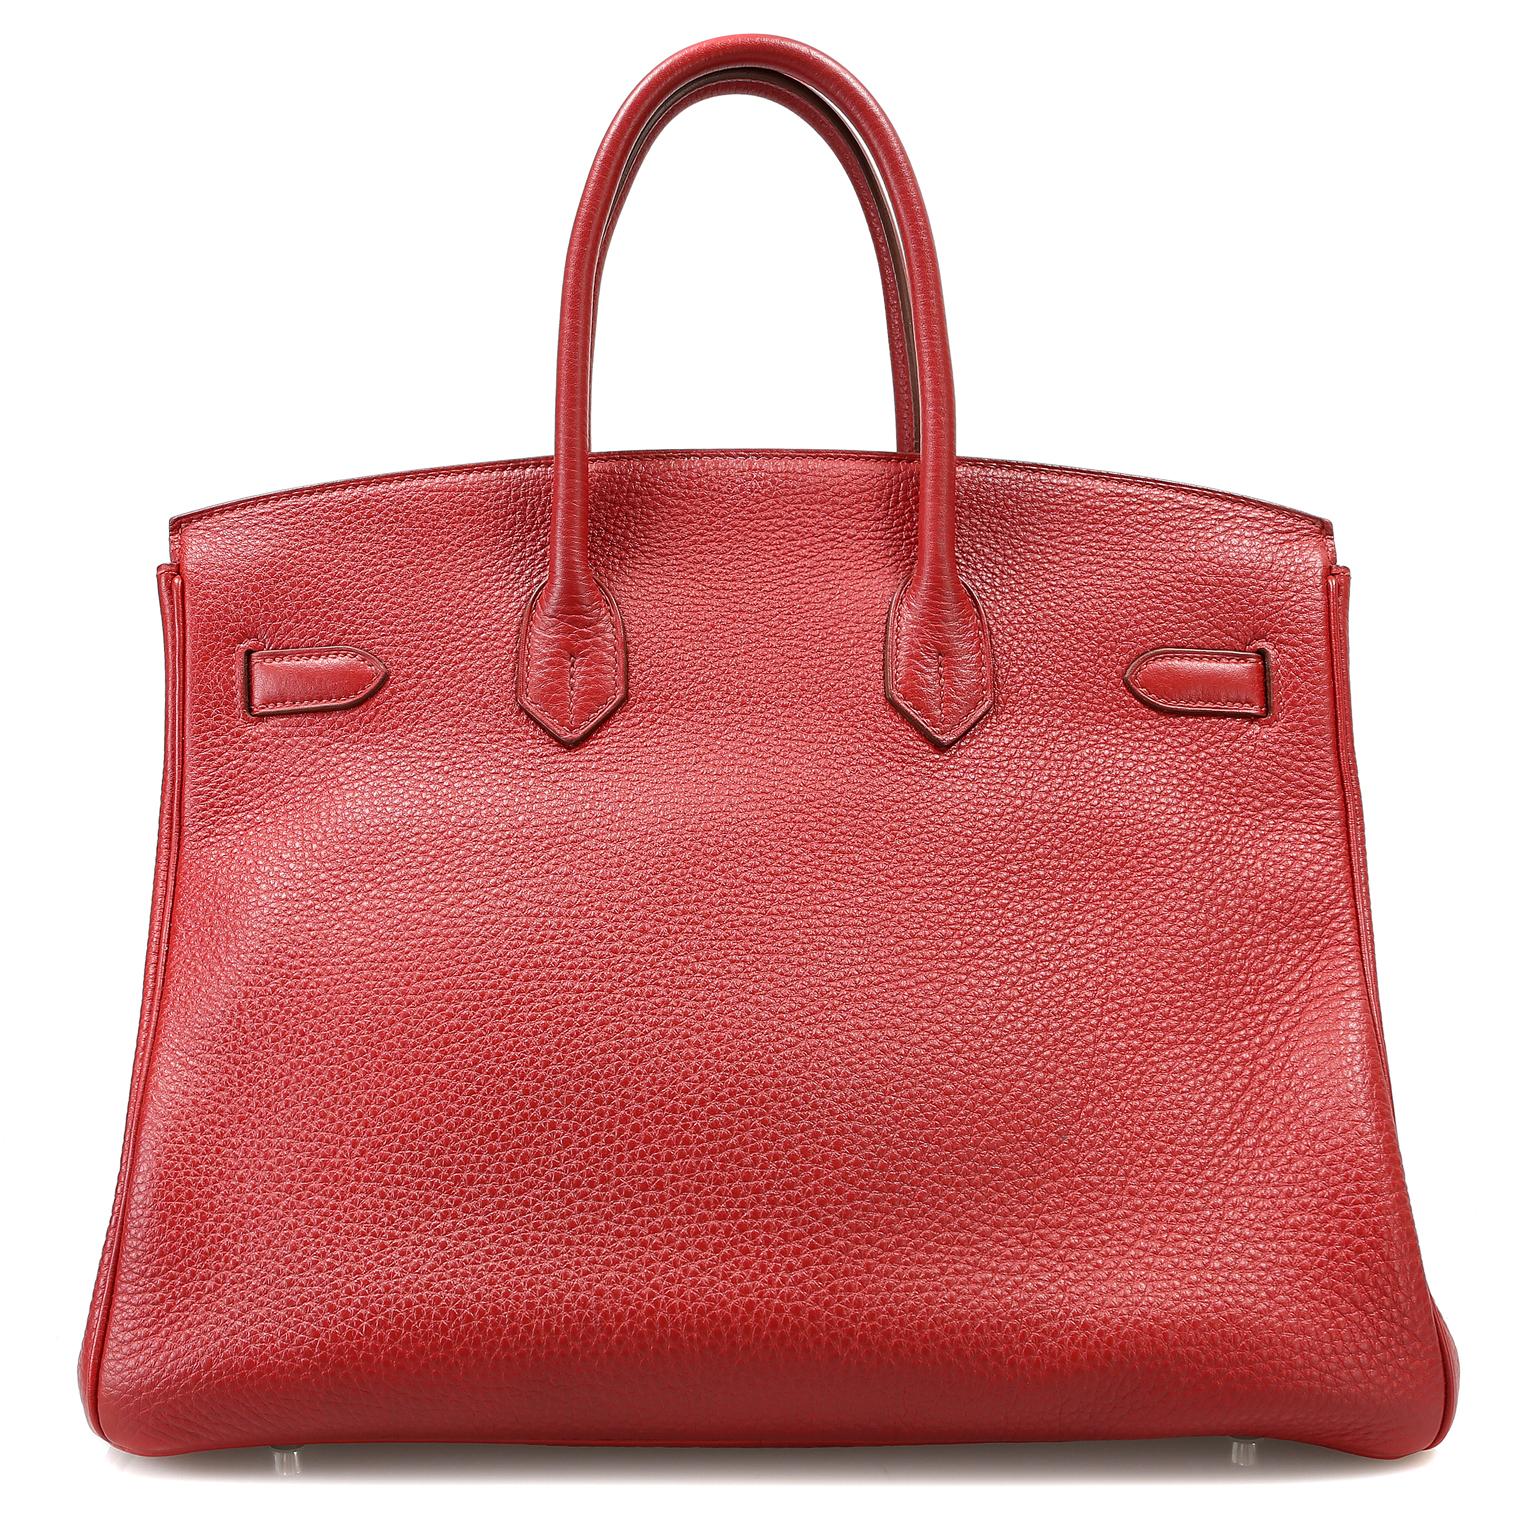 This authentic Hermès Rouge VIF Clemence 35 cm Birkin is in excellent condition.  Hermès bags are considered the ultimate luxury item the world over.  Hand stitched by skilled craftsmen, wait lists of a year or more are common.  Rouge VIF is a